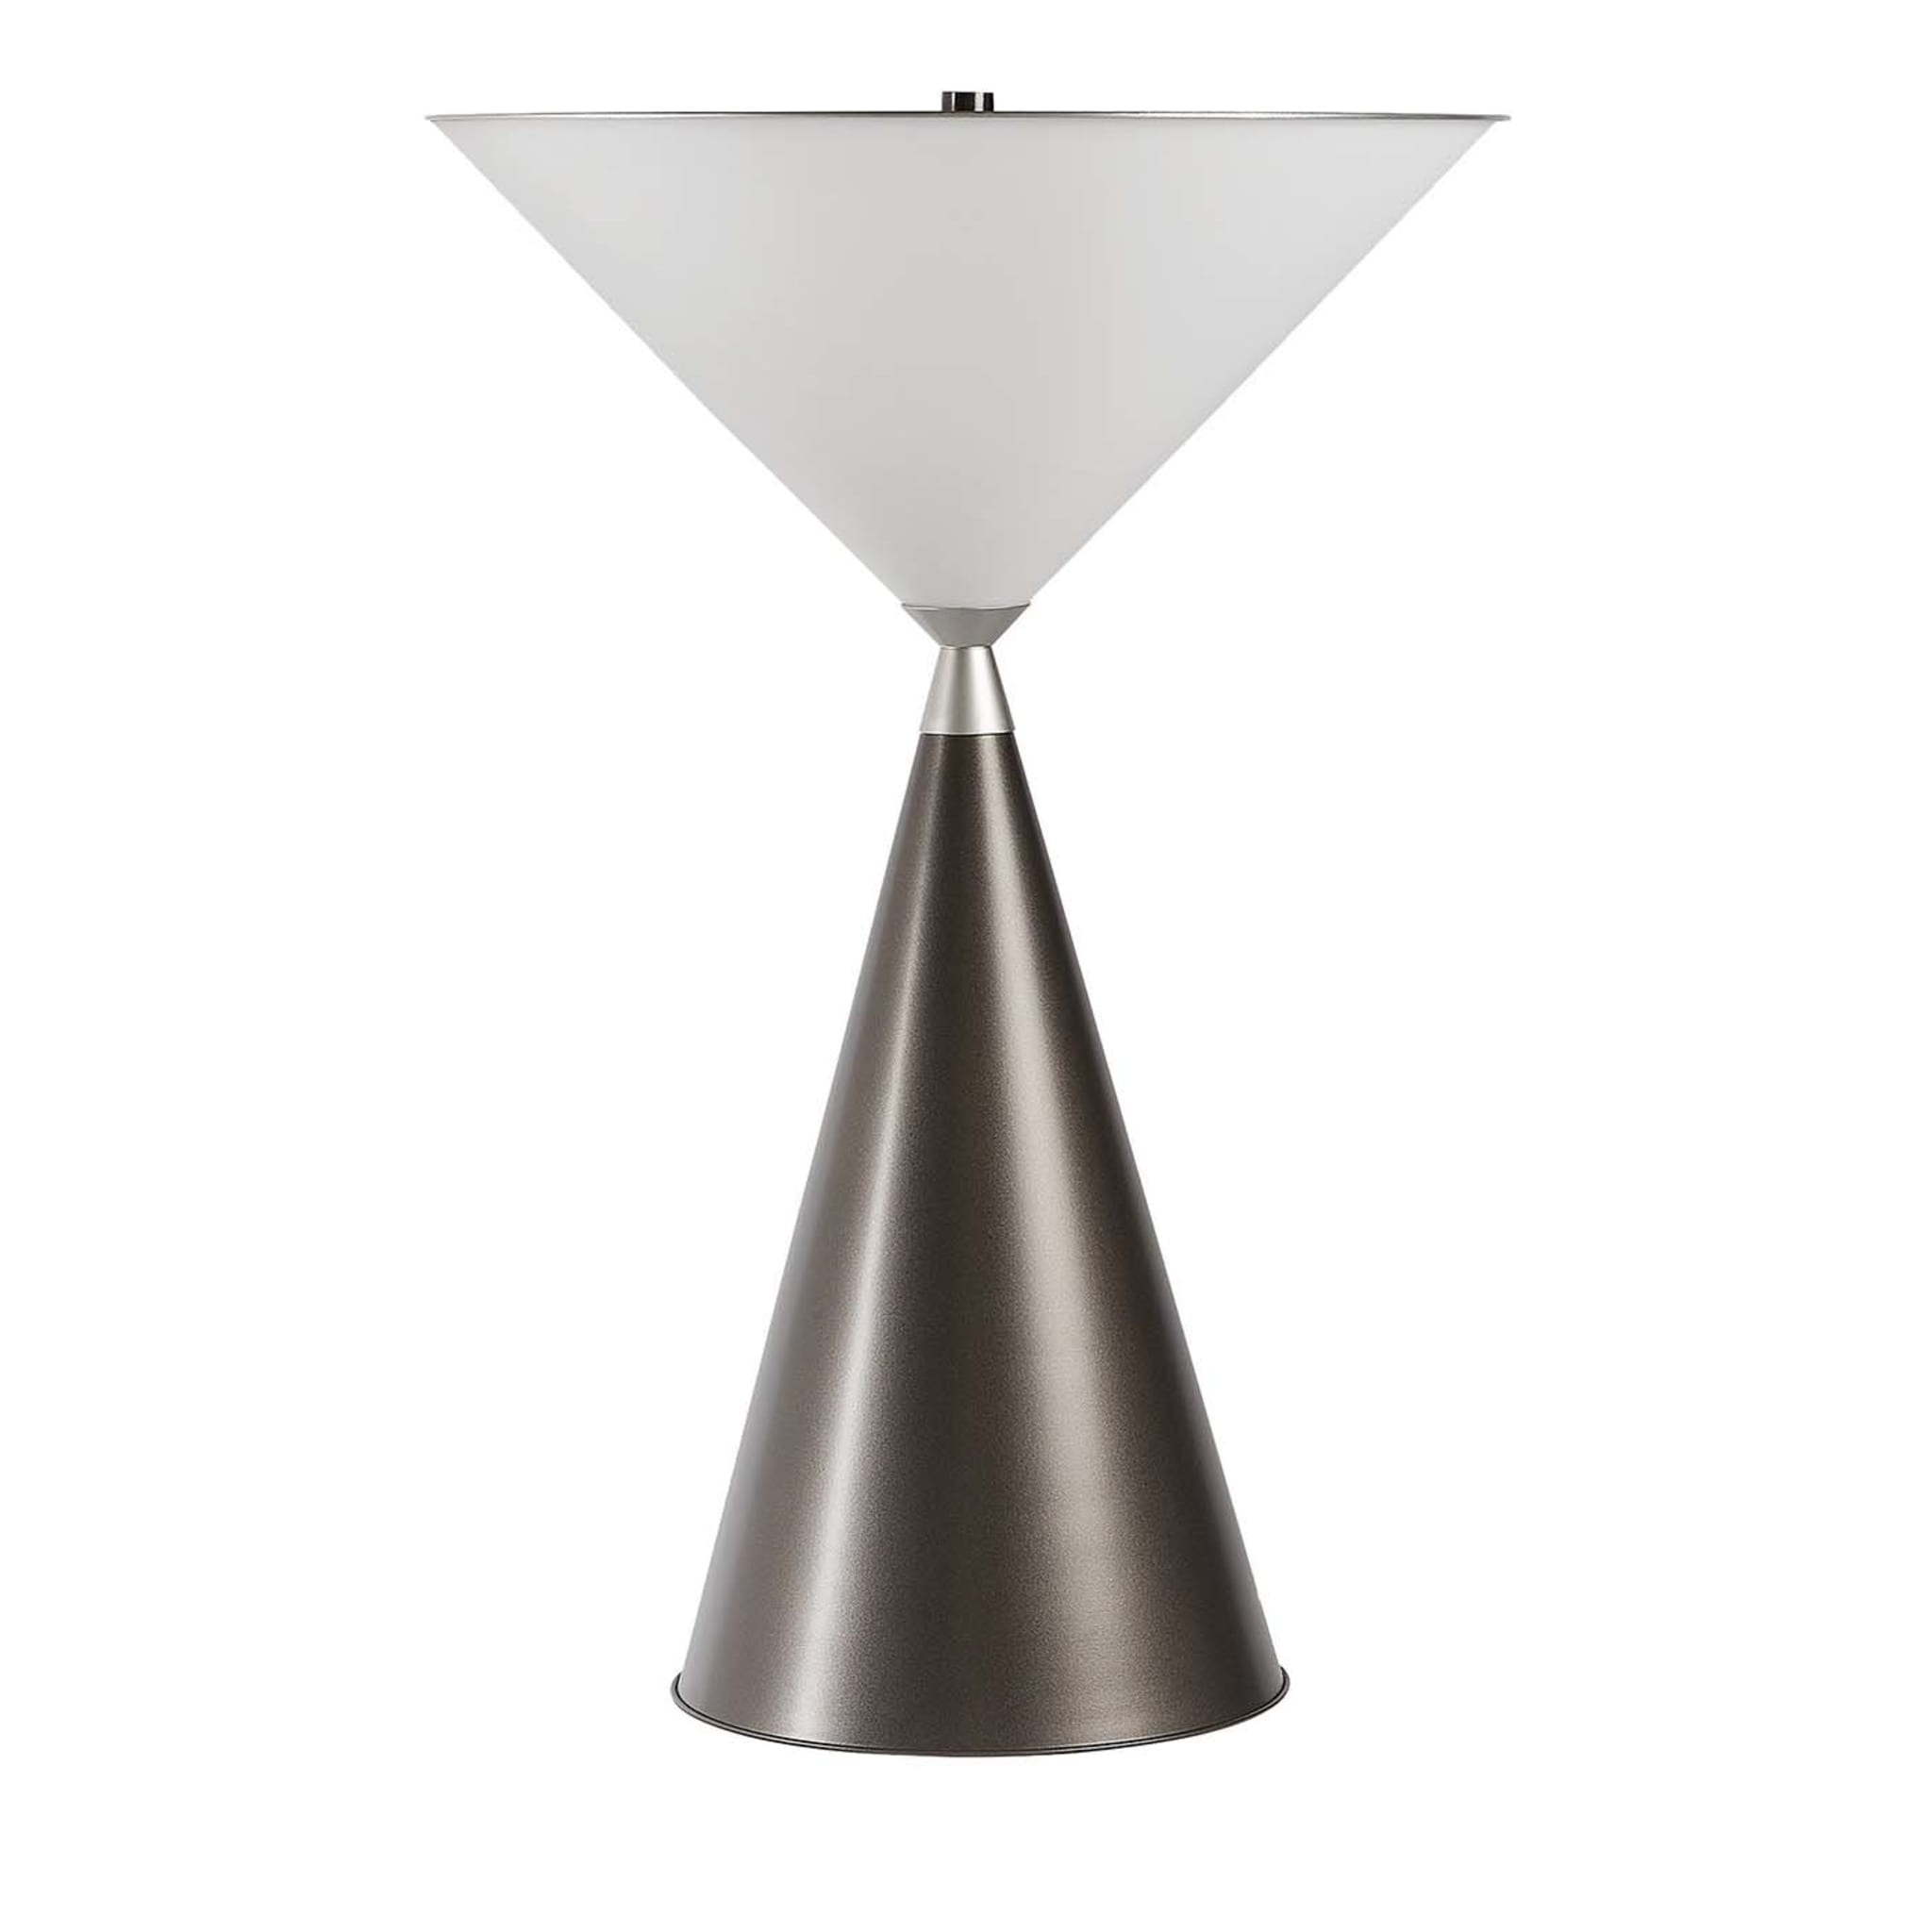 Icones Table Lamp by Lorenza Bozzoli - Main view